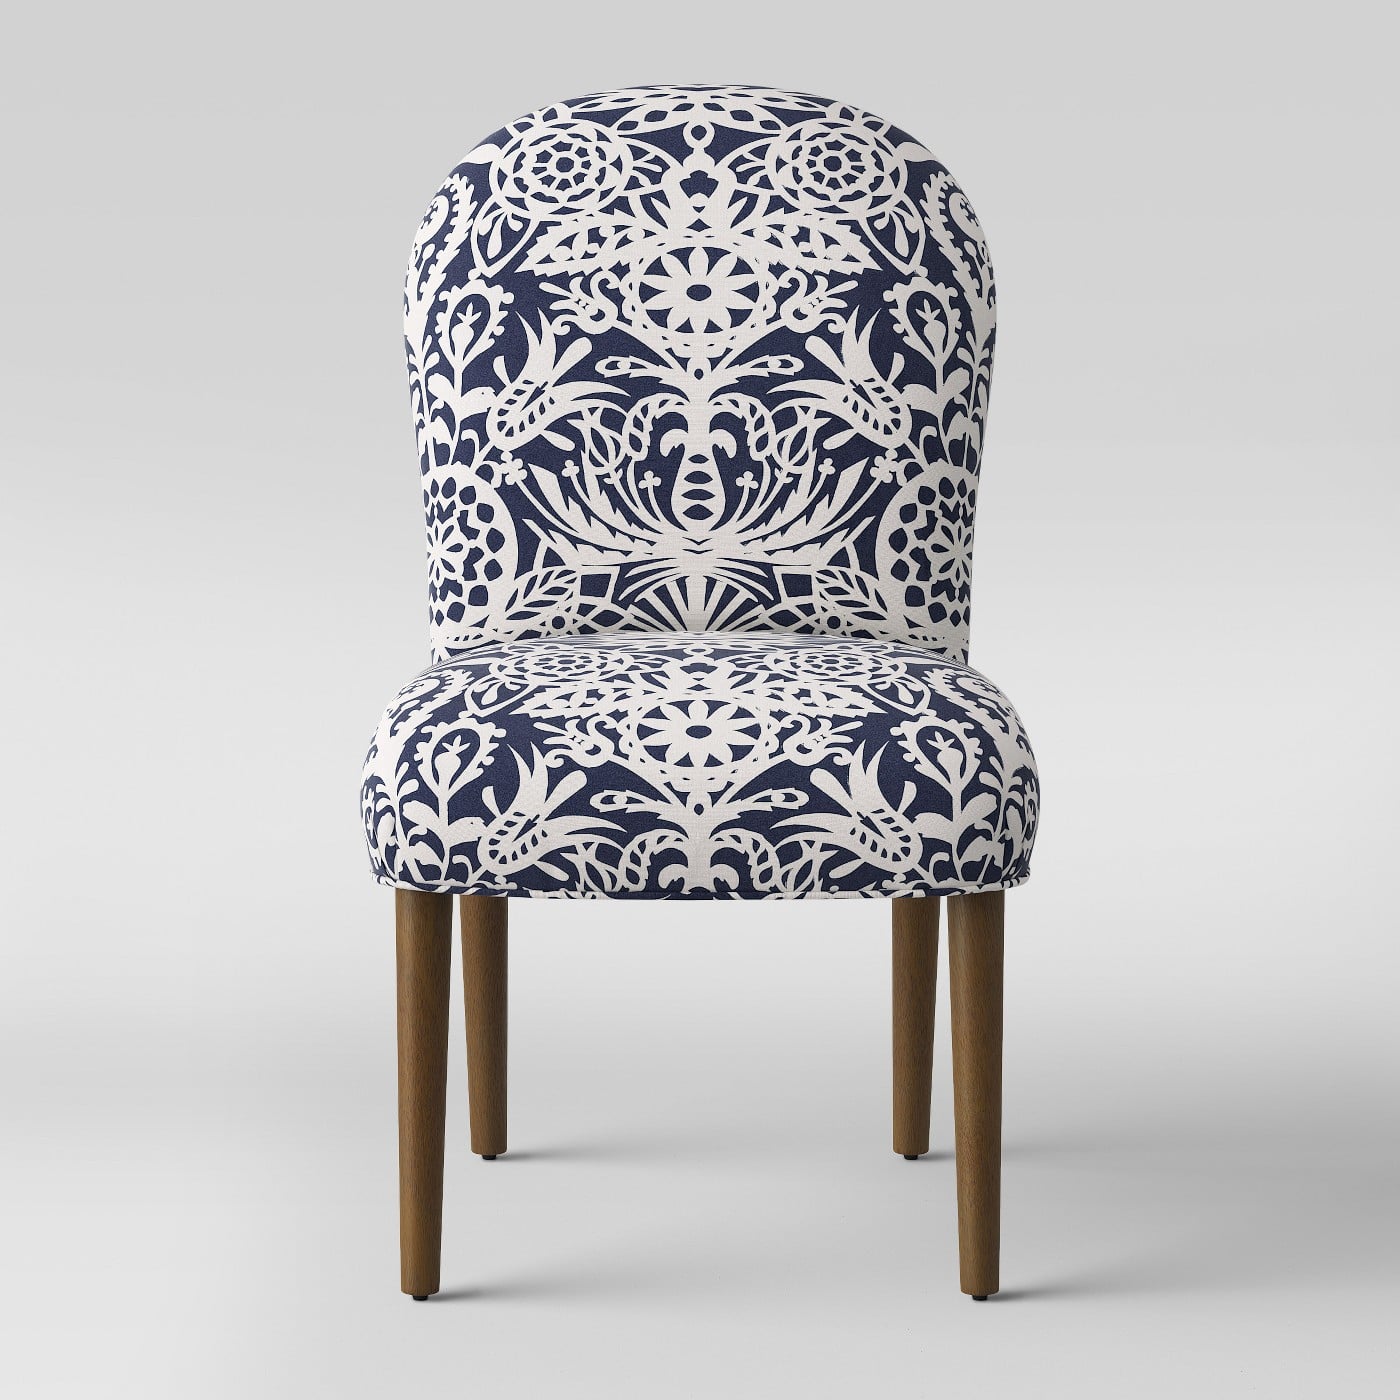 caracara rounded back dining chair  target just dropped its